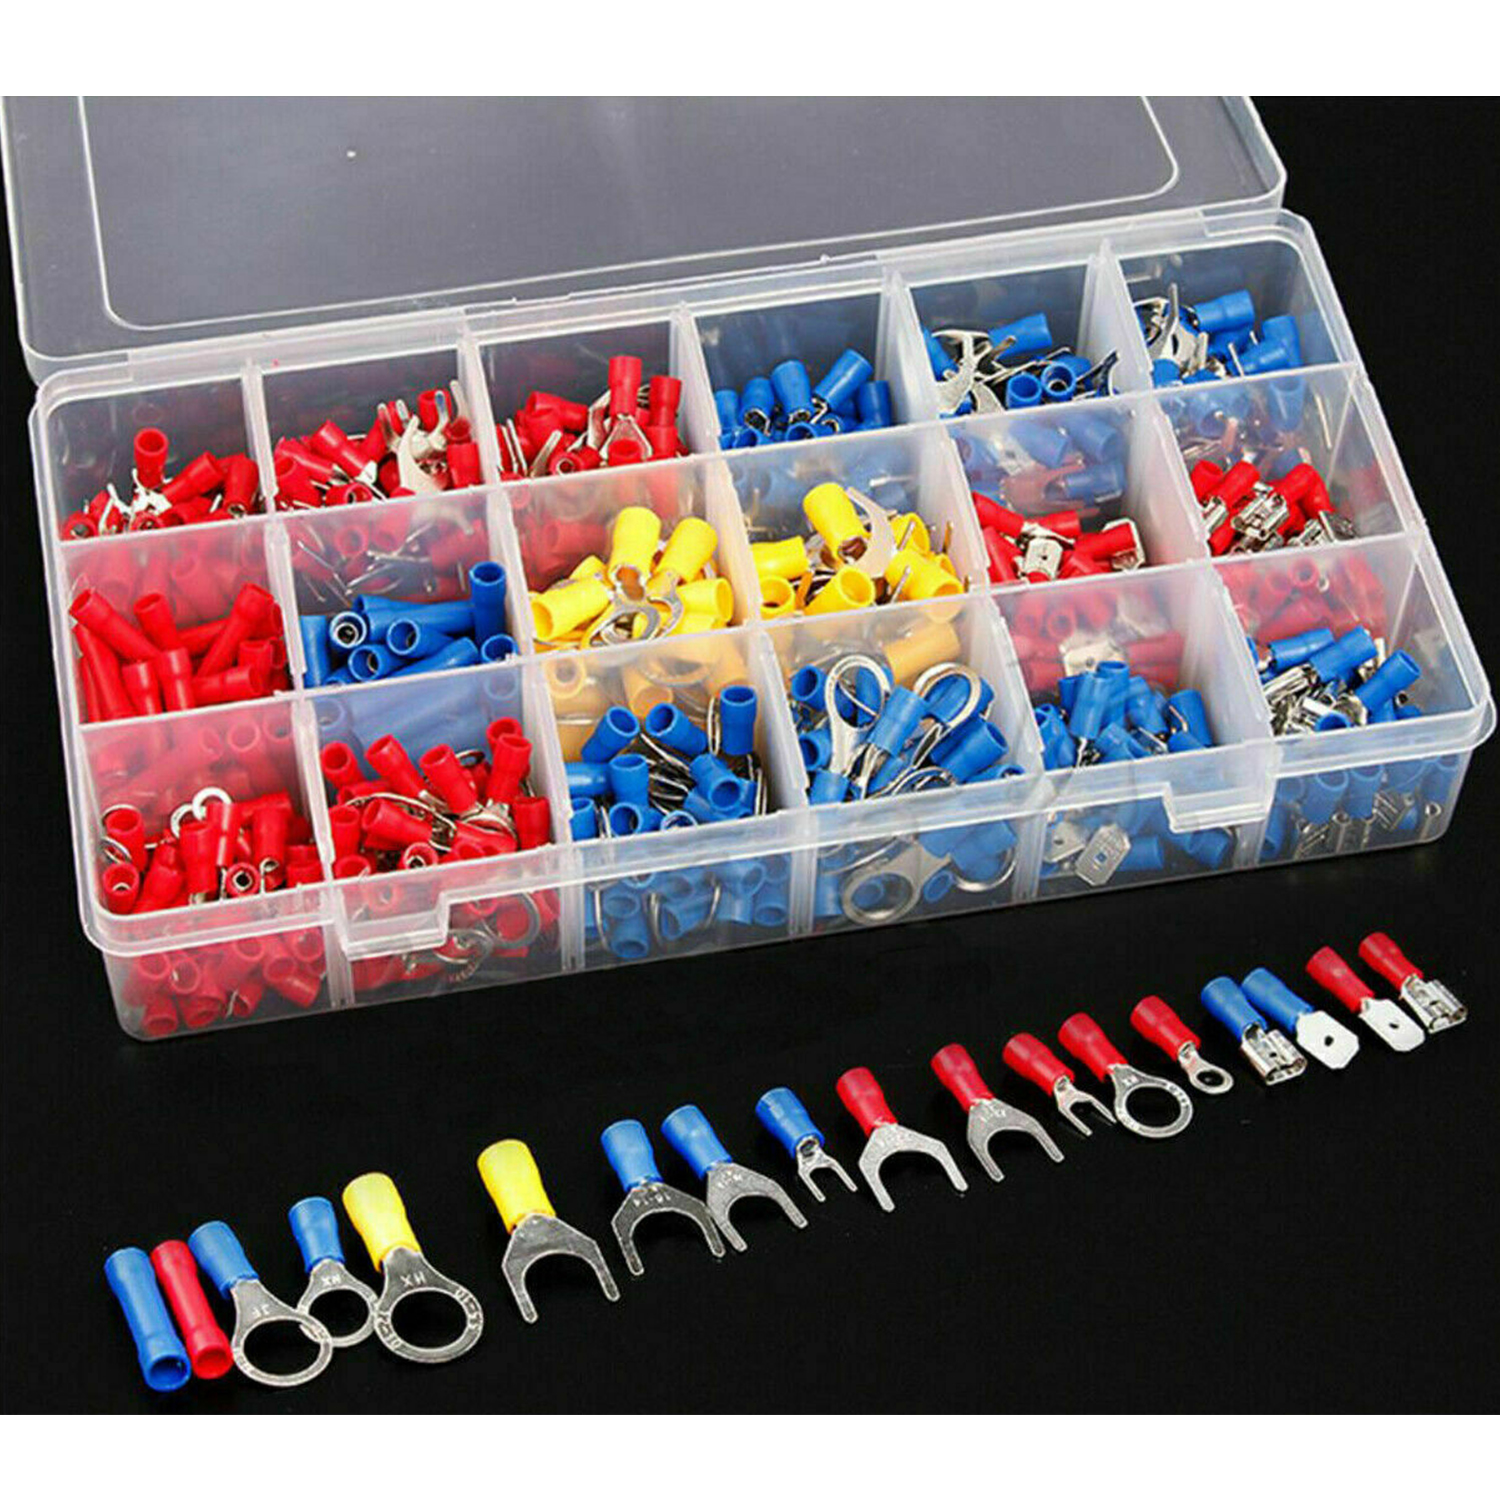 520 PCS Heat Shrink Wire Connectors, Multipurpose Waterproof Electrical Wire Terminals kit, Insulated Crimp Connectors Ring Fork Spade Butt Splices for Automotive Marine Boat Truck